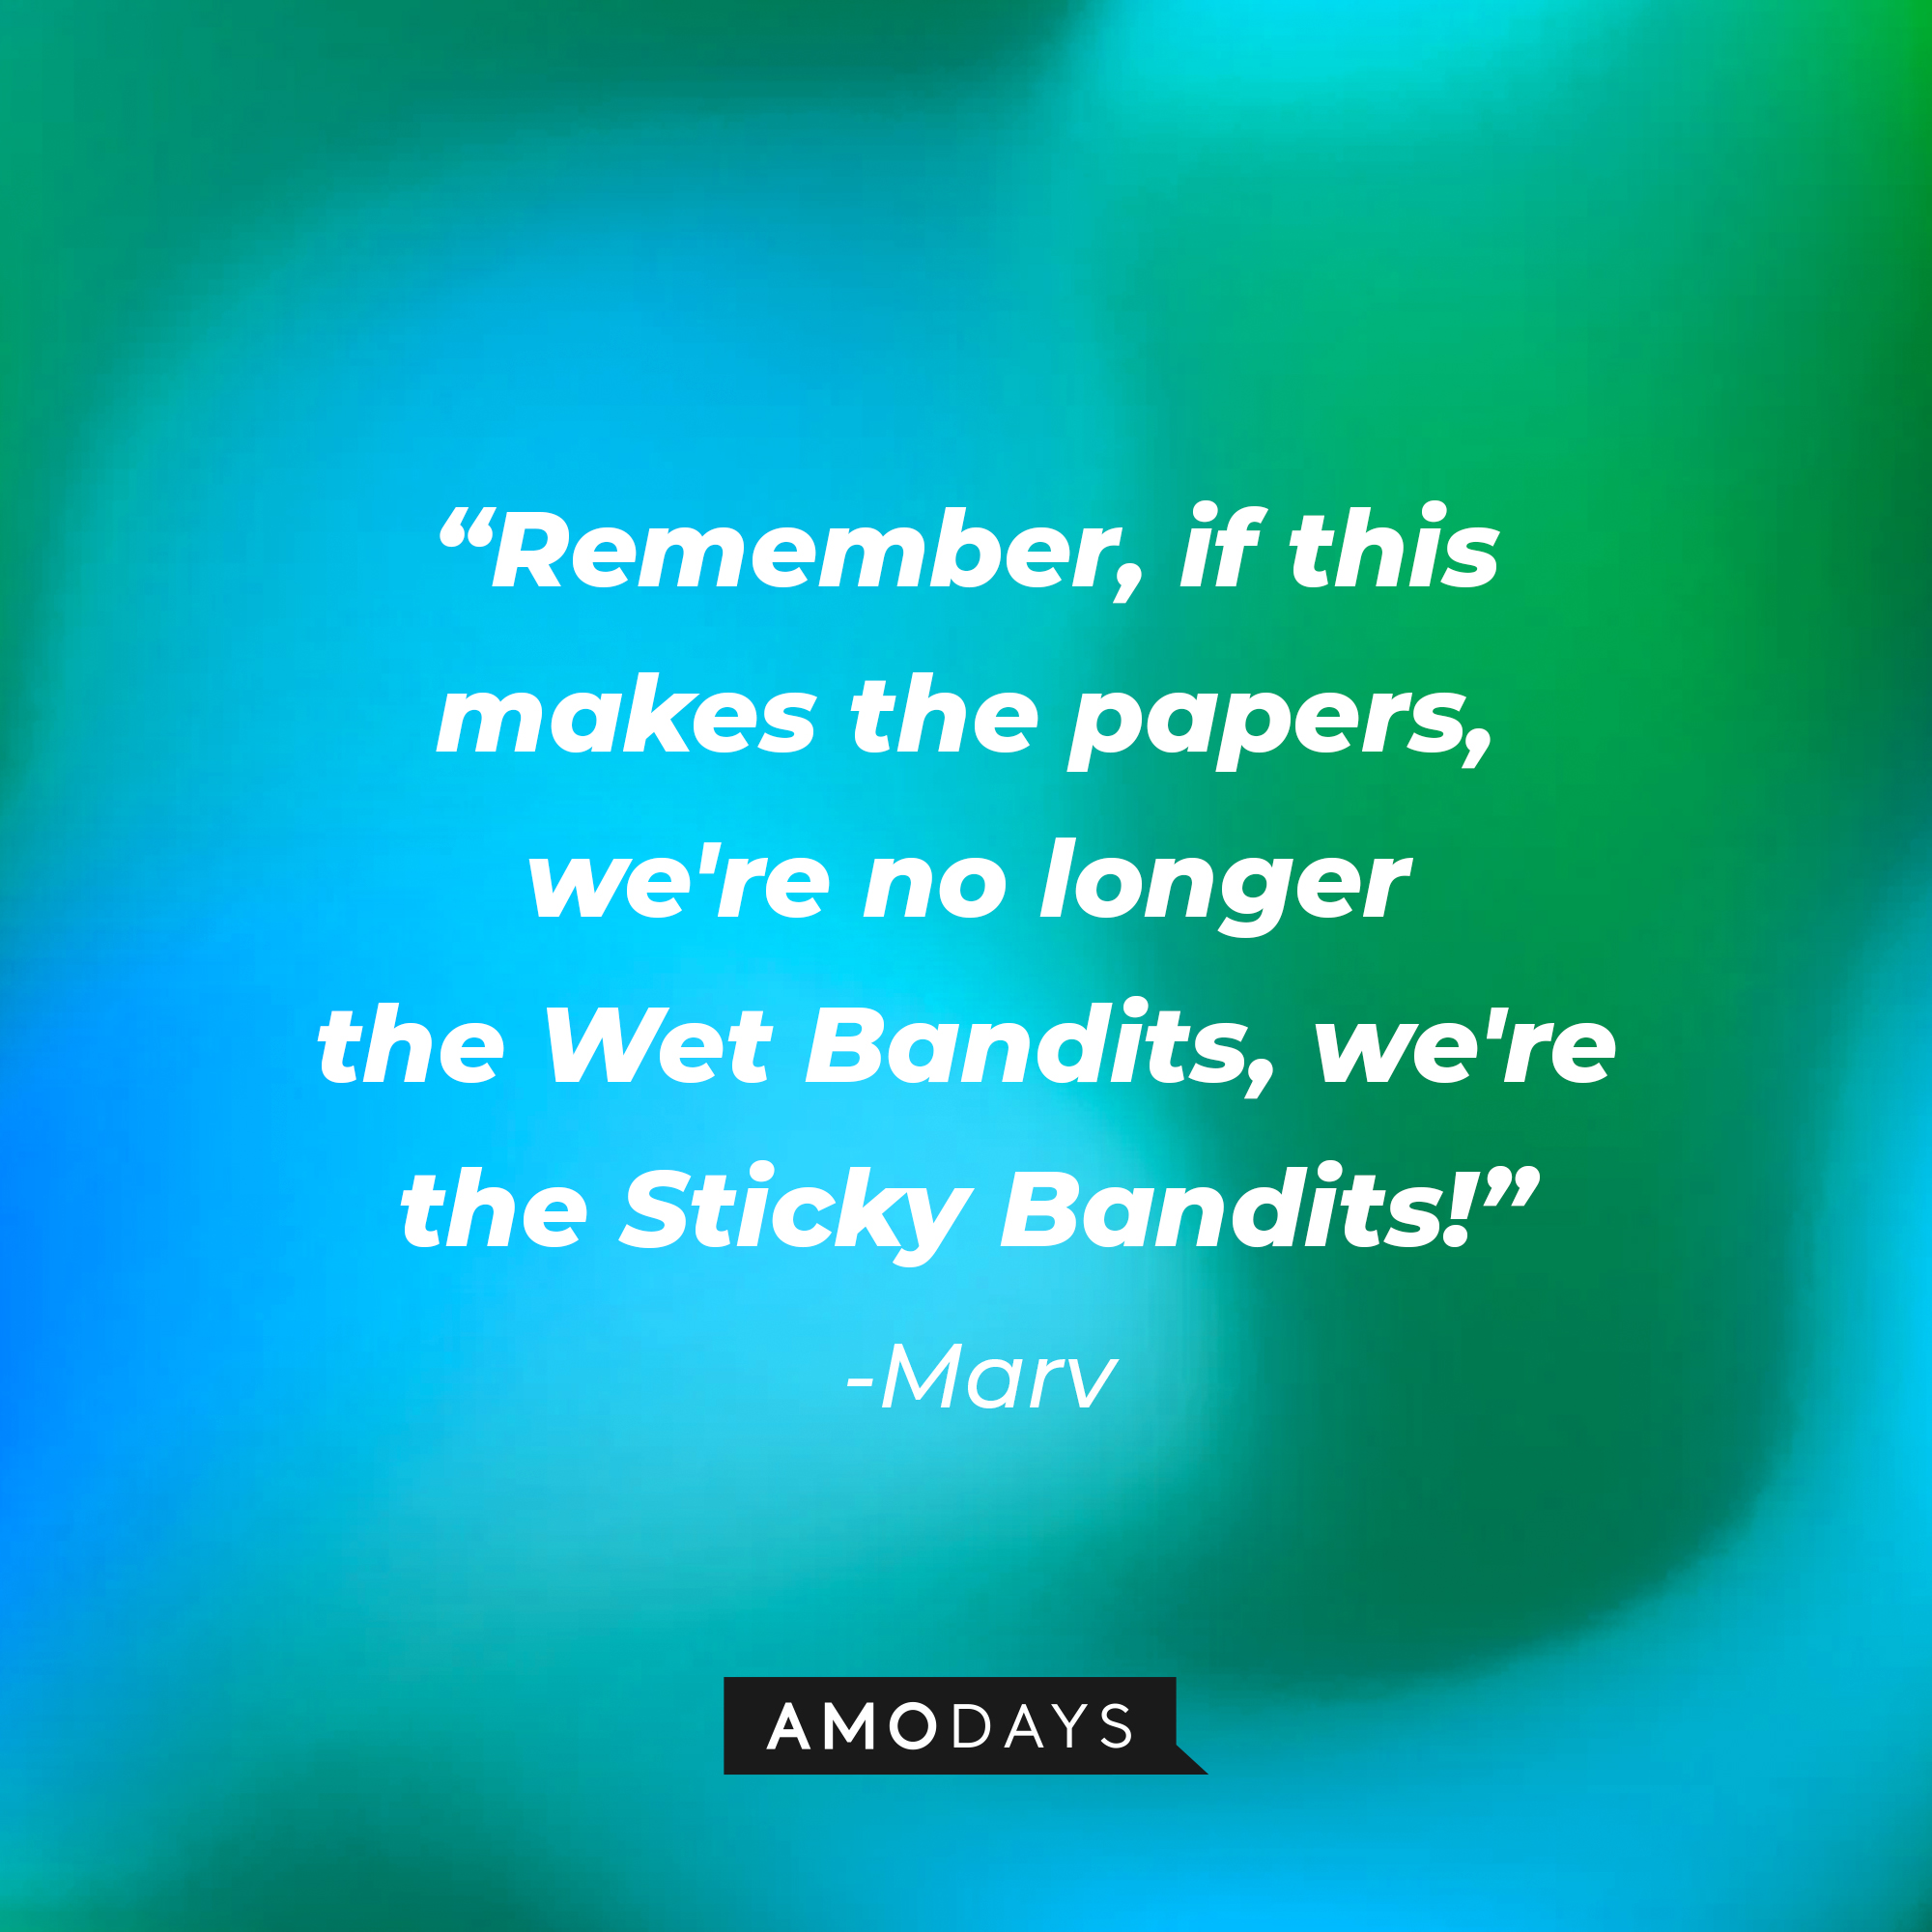 Marv's quote: "Remember, if this makes the papers, we're no longer the Wet Bandits, we're the Sticky Bandits!" | Source: AmoDays